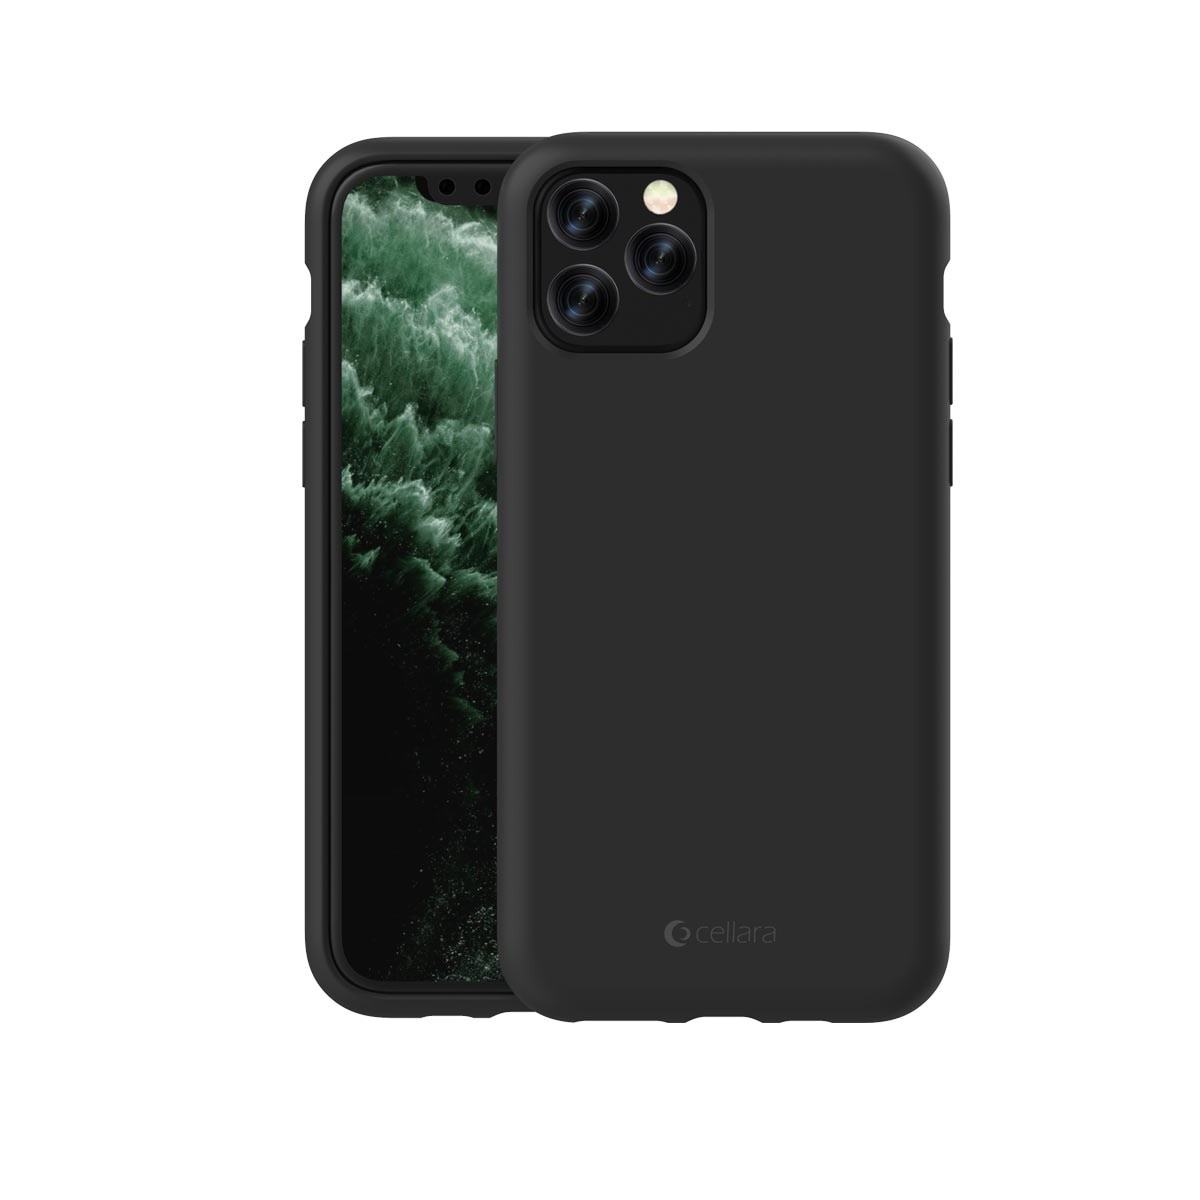 Pick up leaves clutch Stationary Husa protectie spate cellara din silicon colectia soft Compatibil Cu iPhone  11 Pro - Negru - eMAG.ro